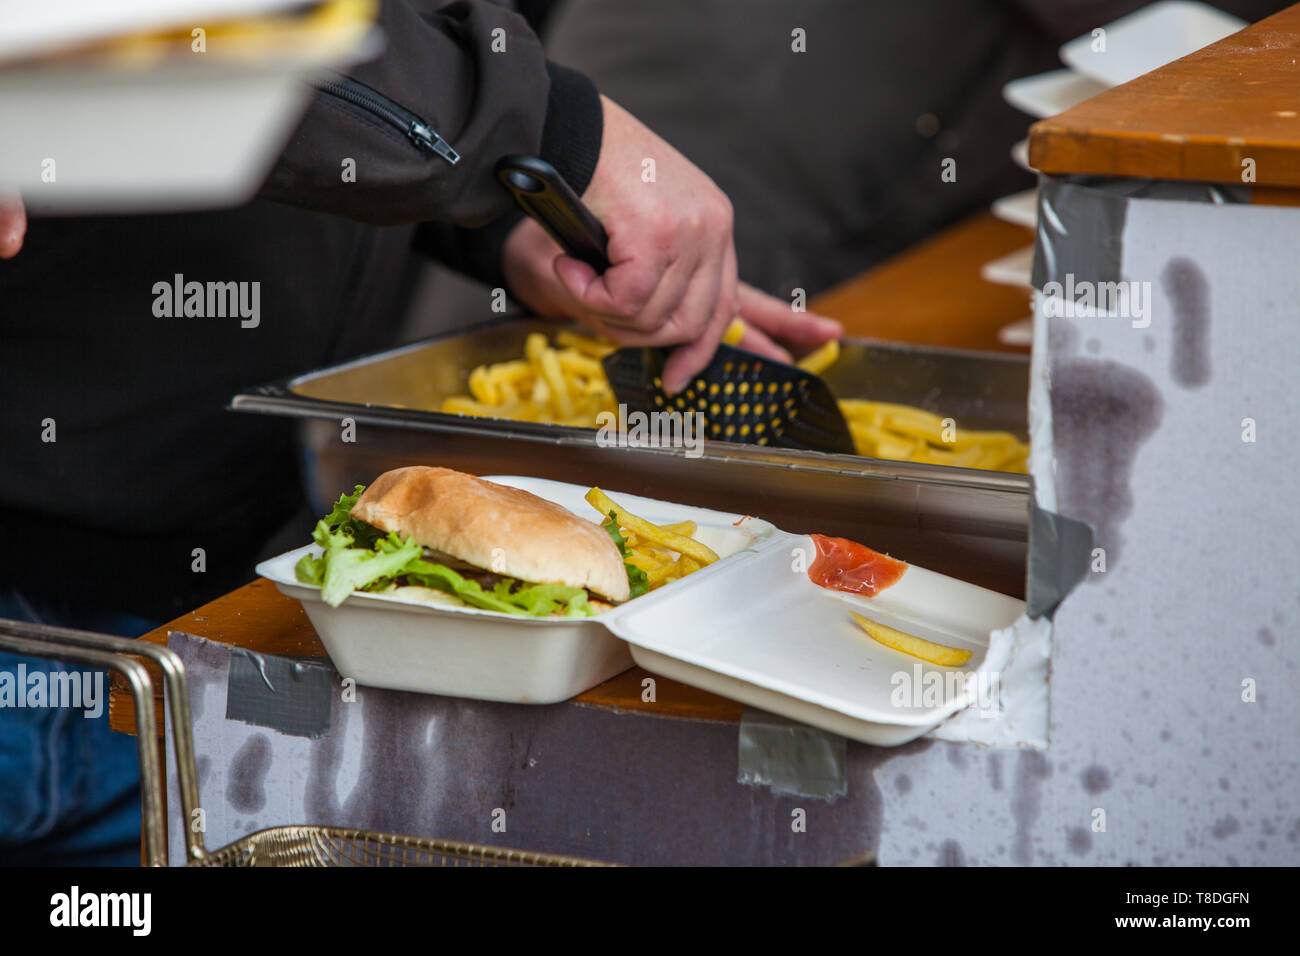 Preparing take away meal portion with freshly cooked burger and french fries on outdoors kitchen at street music festival in Gland, Vaud, Switzerland Stock Photo